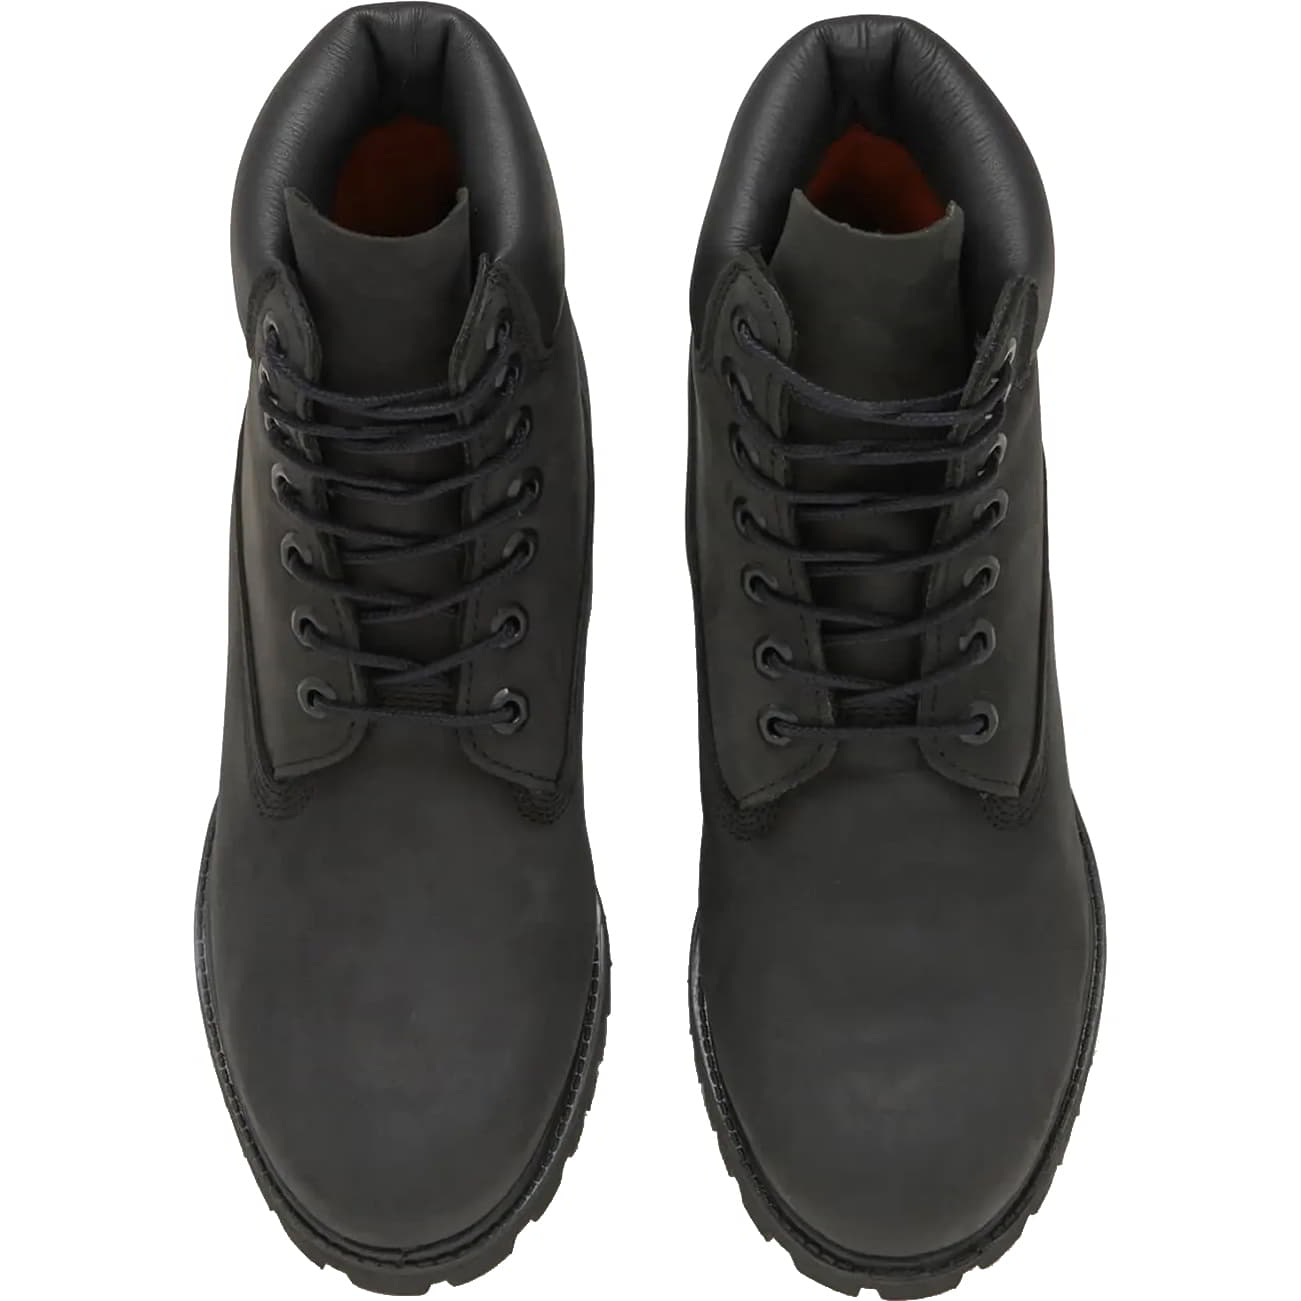 Timberland Mens 6 Inch Premium Black Classic Wide Fit Waterproof Boots - 10073 2951